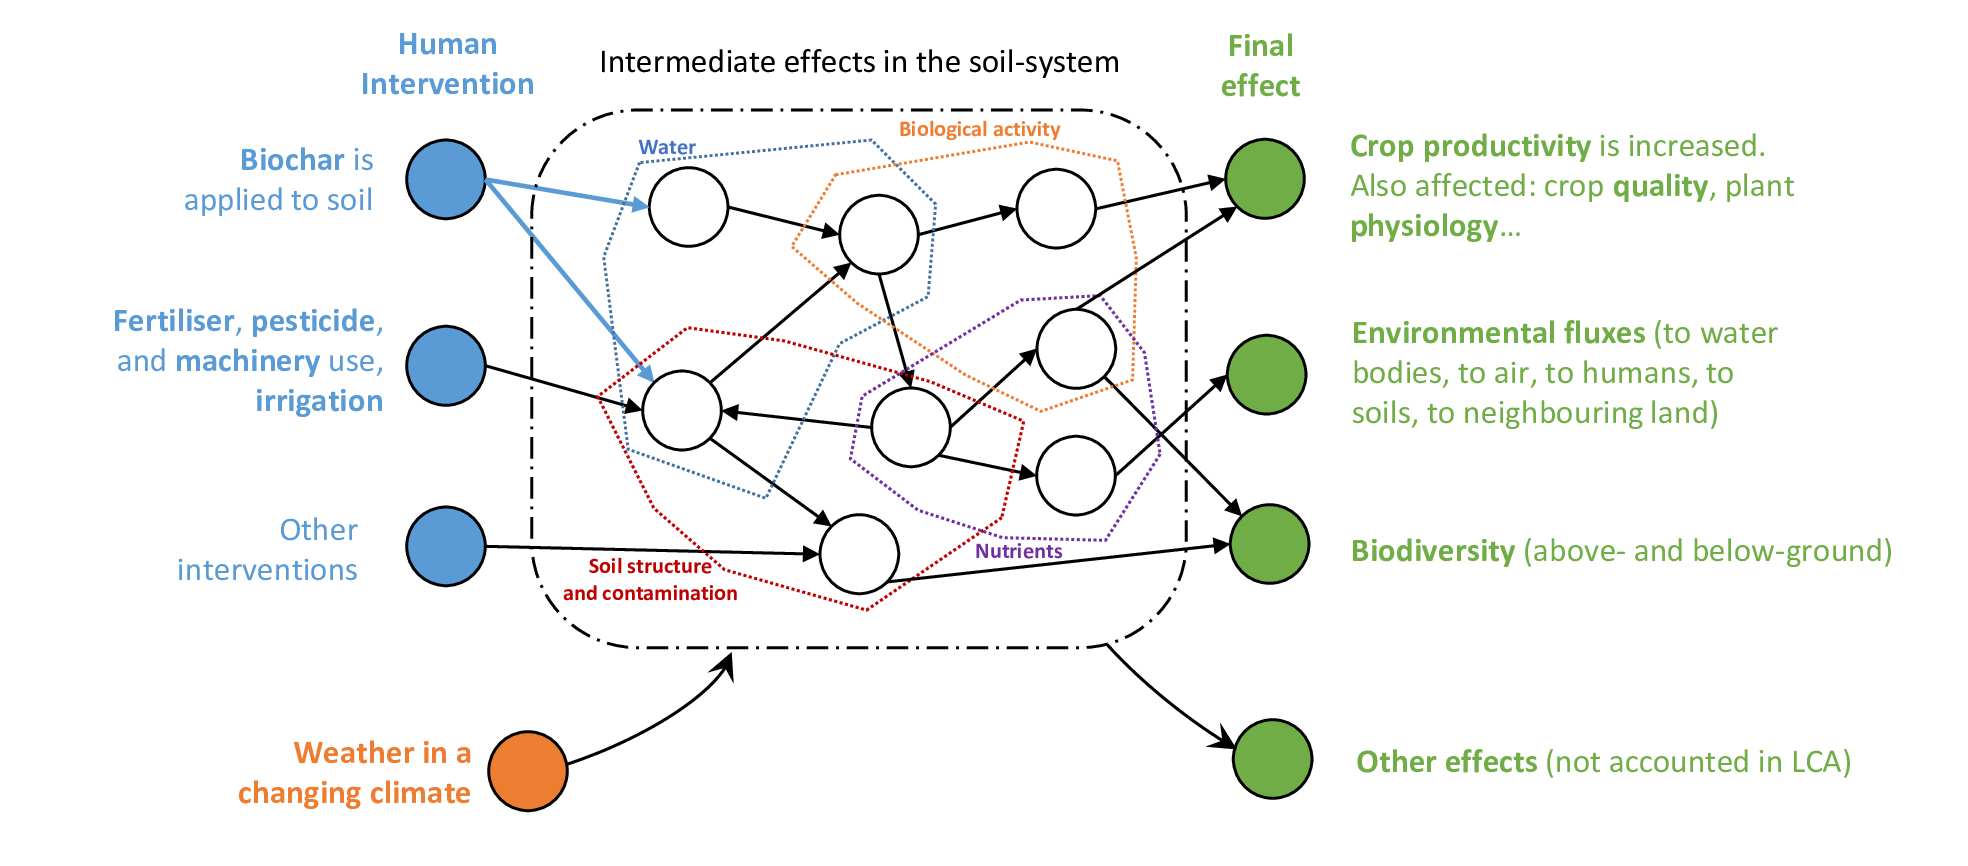 *Biochar complex and interrelated effects in agroecosystems* adapted from [Azzi et al. (2021)](https://doi.org/10.1016/j.jenvman.2021.112154) 